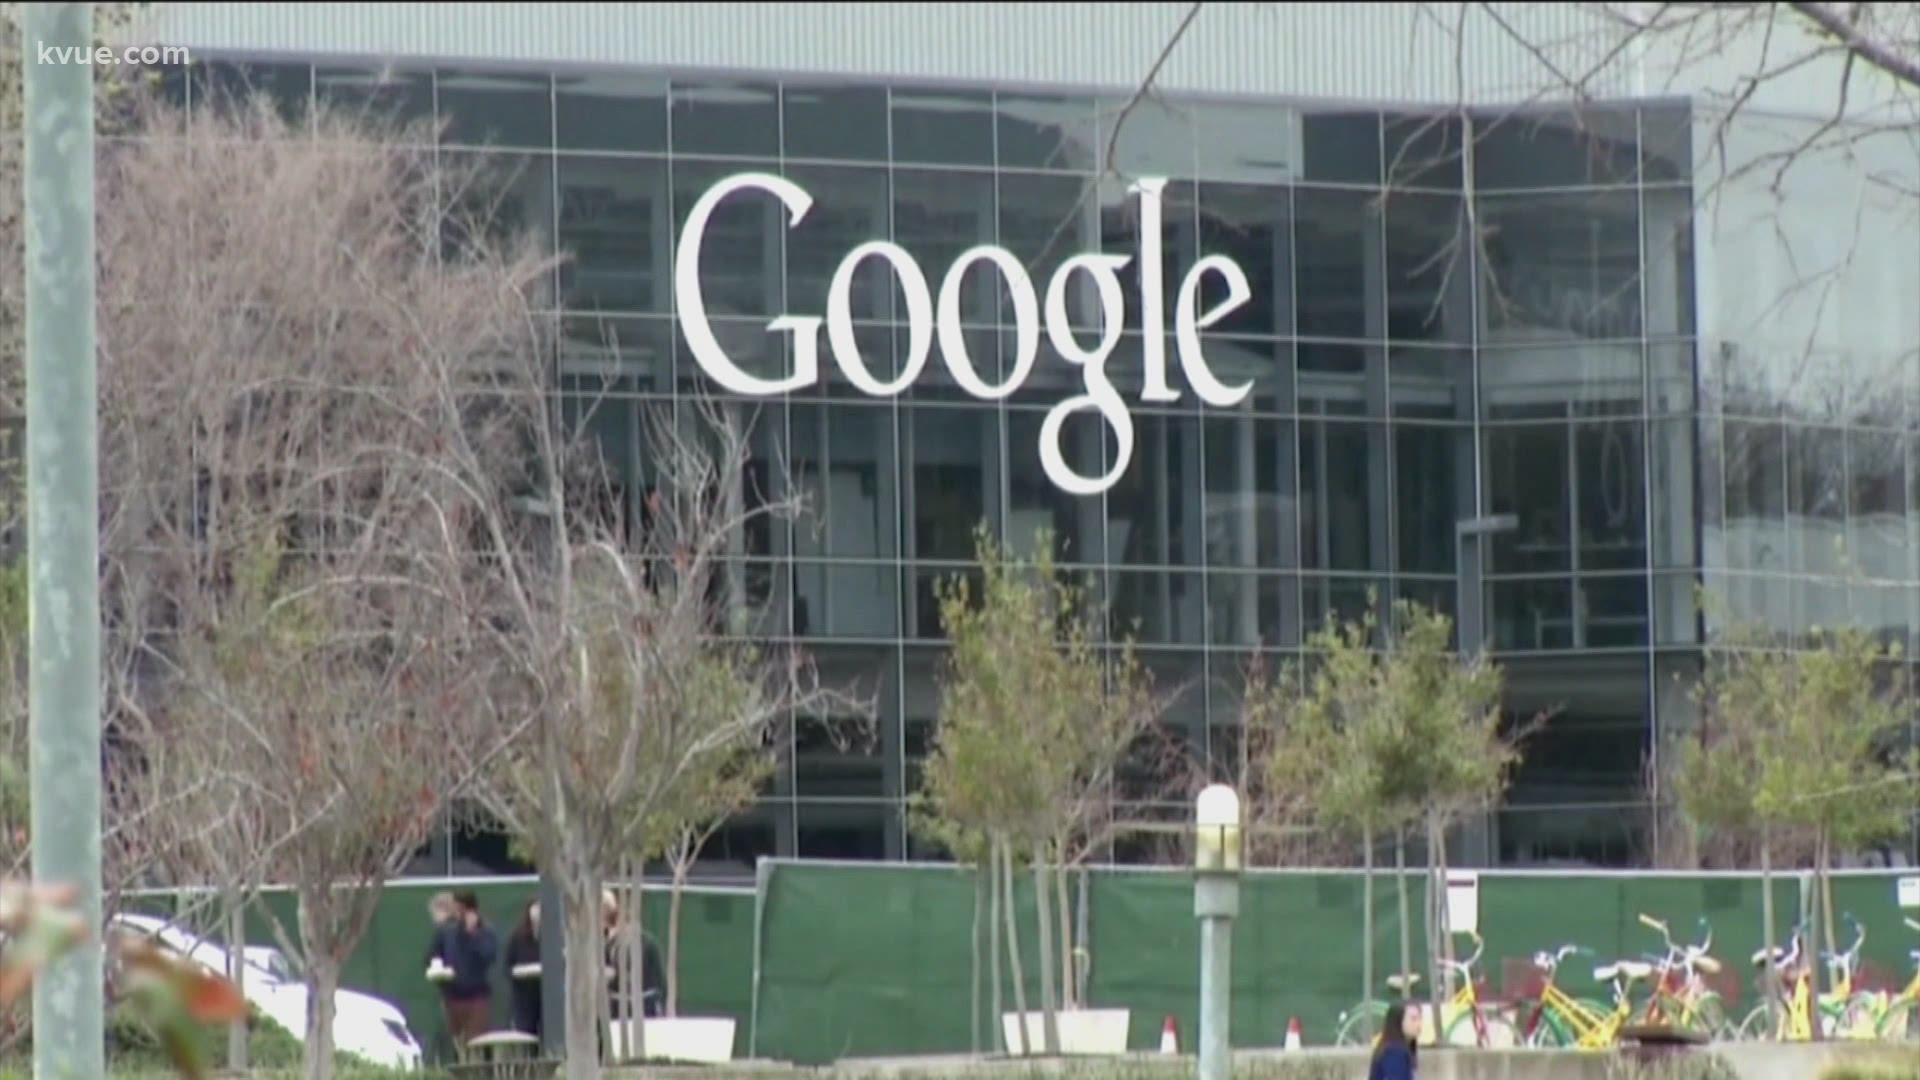 Texas is suing Google for anti-competitive conduct, according to Texas Attorney General Ken Paxton.